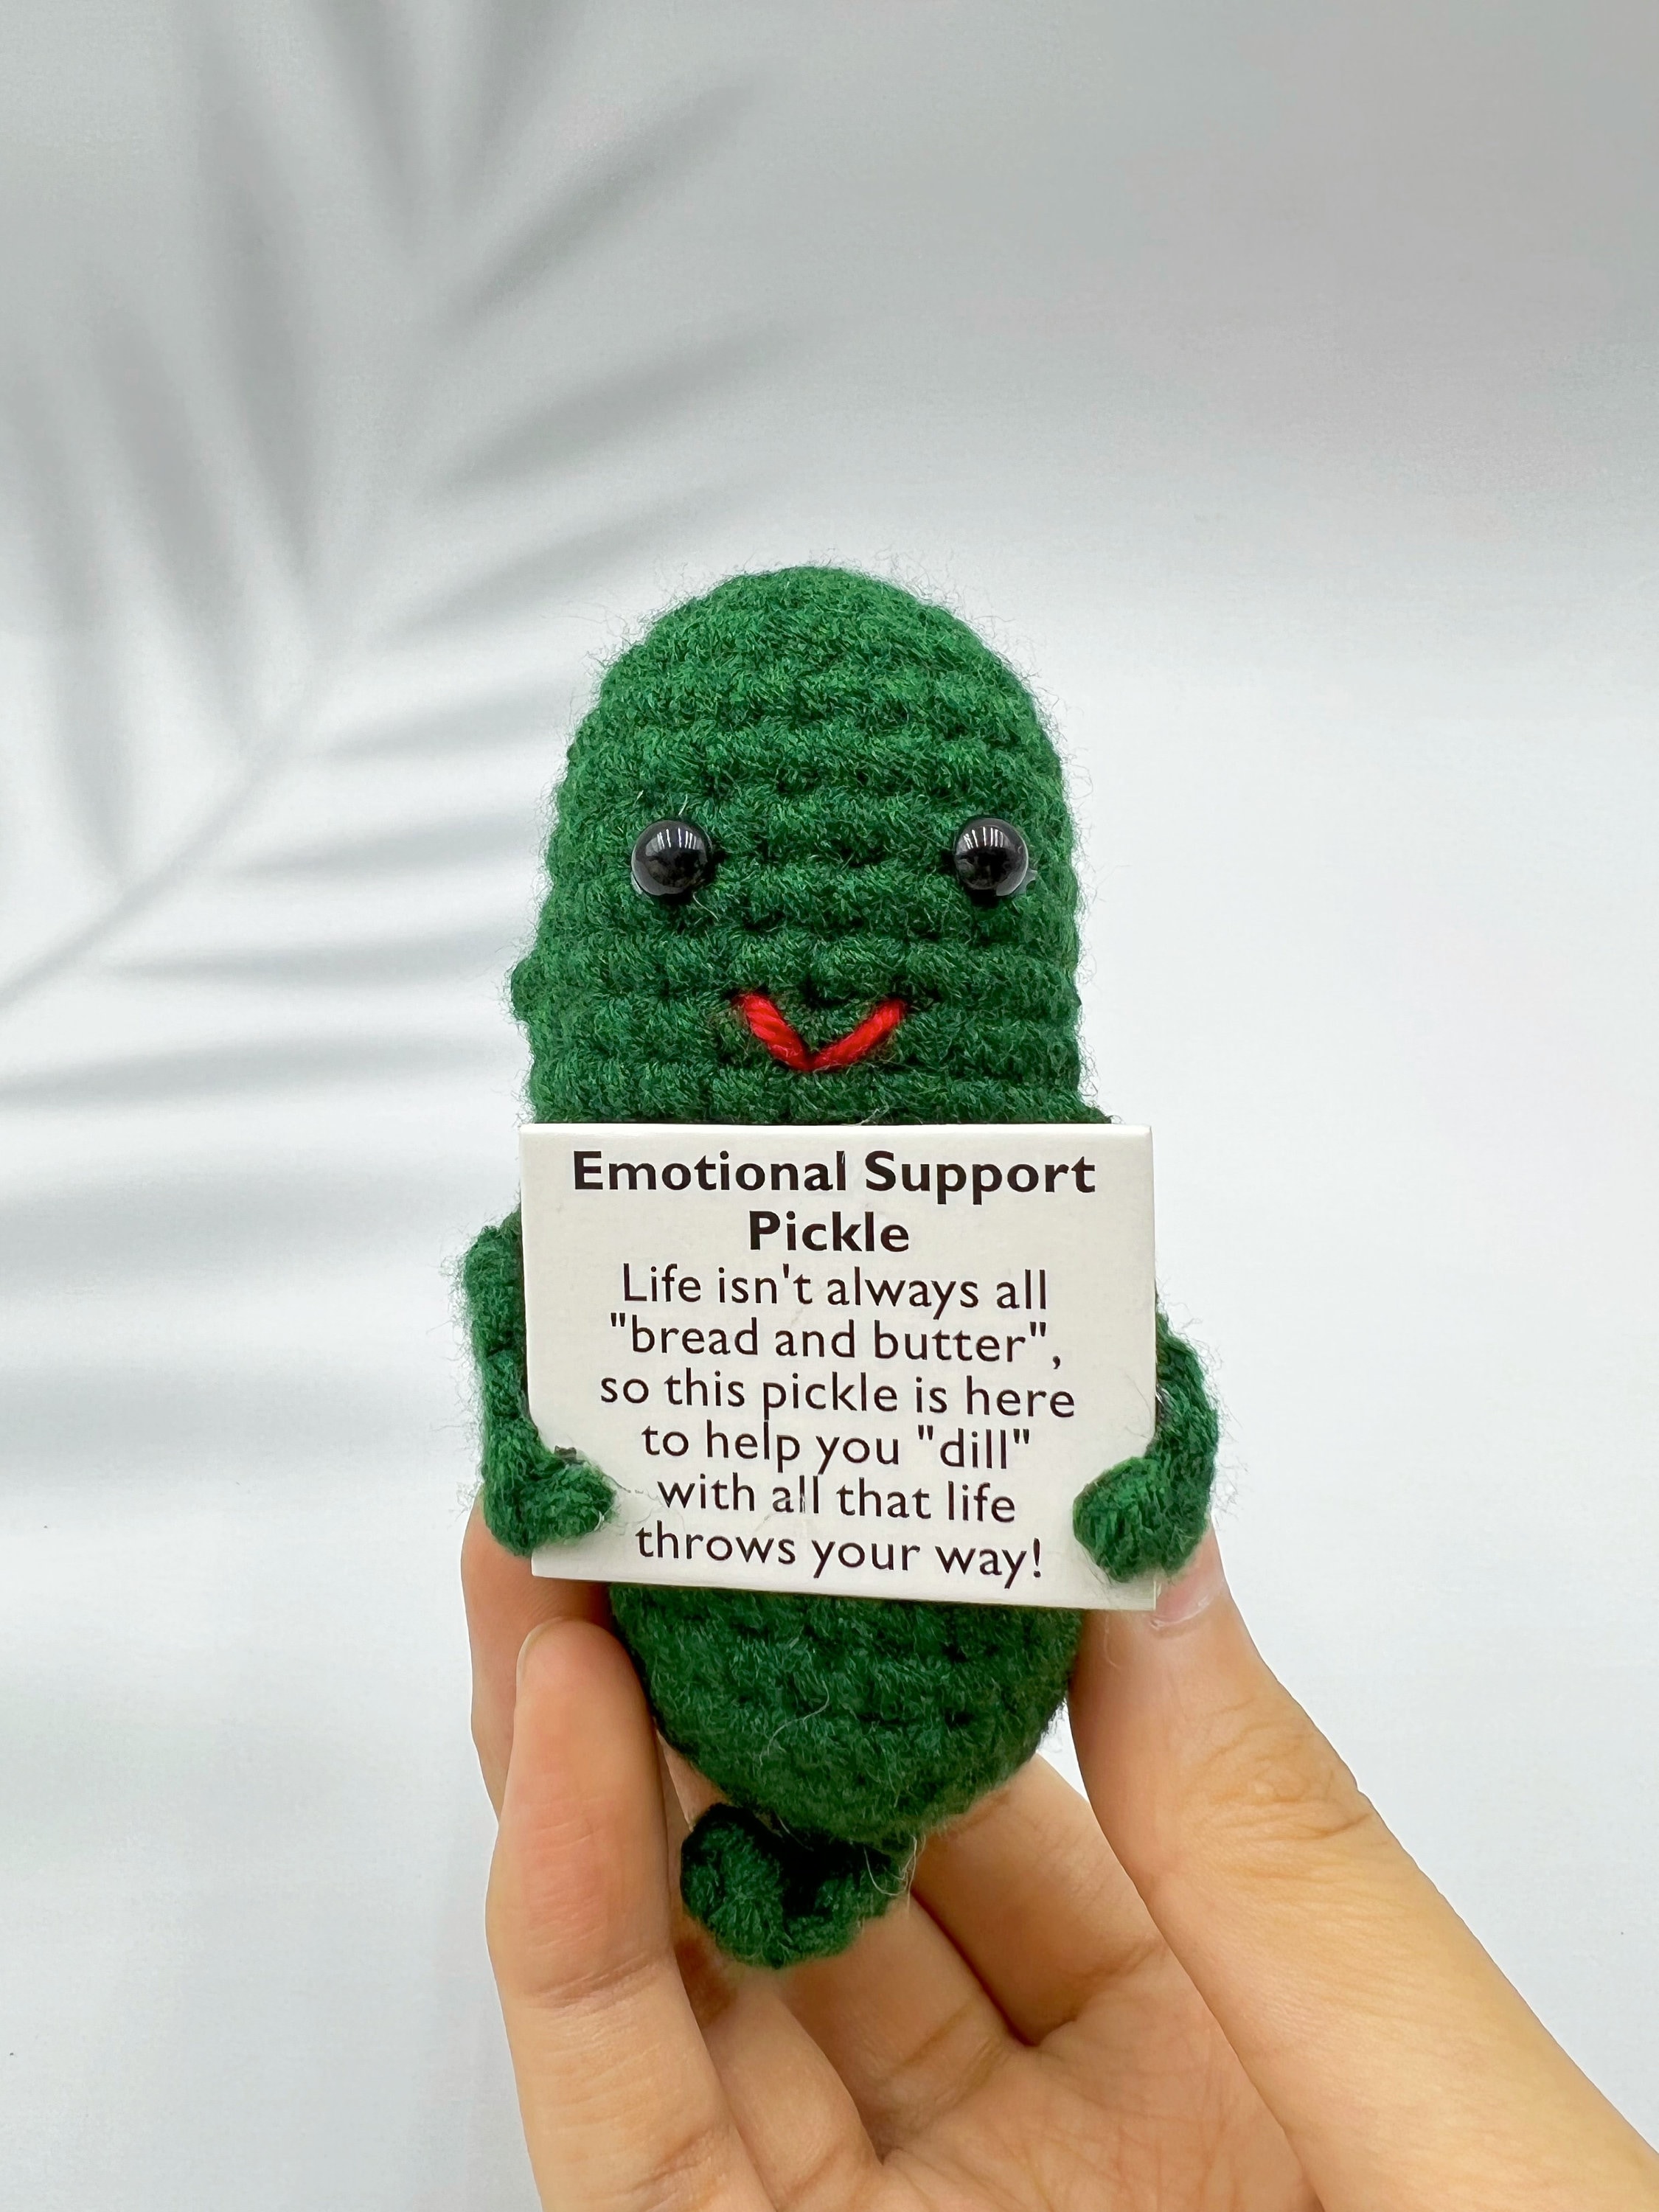 Custom Text Available) Crochet Emotional Support Plushies - Emotional  Support Pickles, Positive Potato Over the Hill Stress Relief Dill with  Challenges Encouraging Gift – The Bloom Crafter